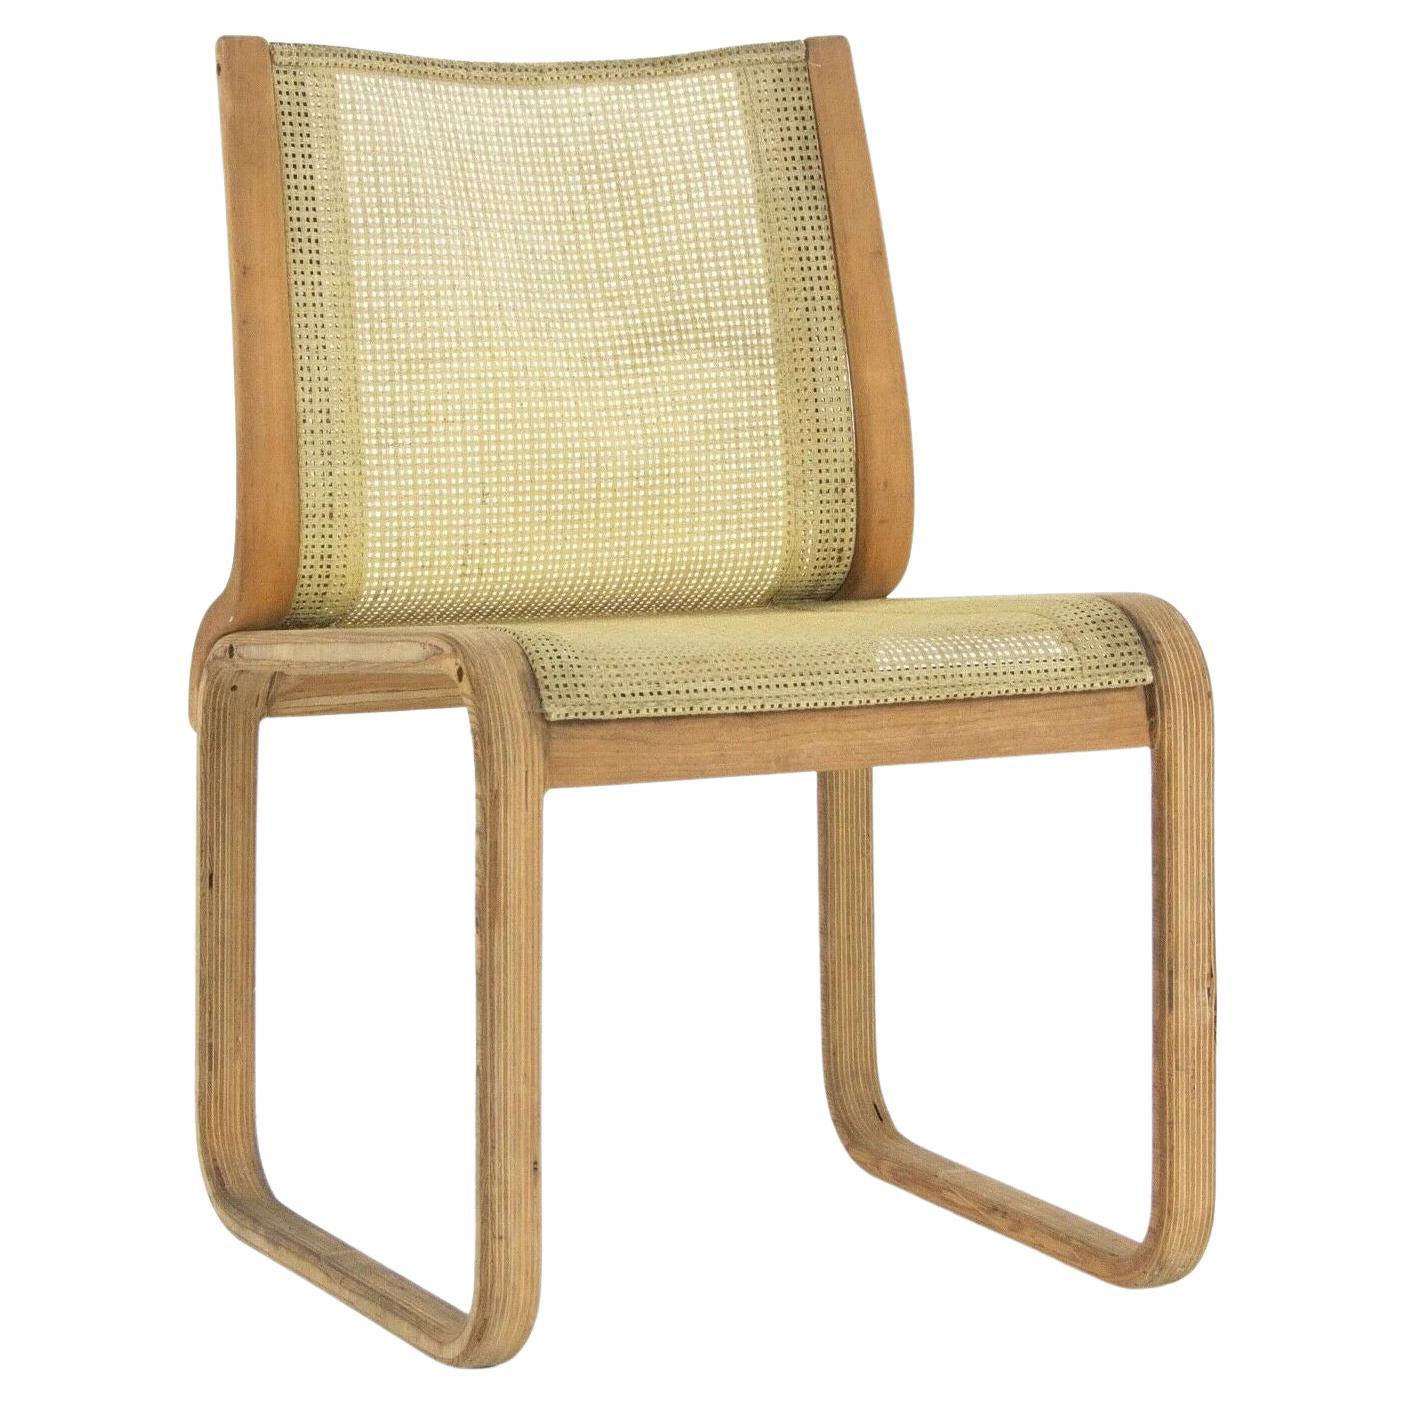 1985 Prototype Richard Schultz Wooden Outdoor Collection Dining Chair For Sale